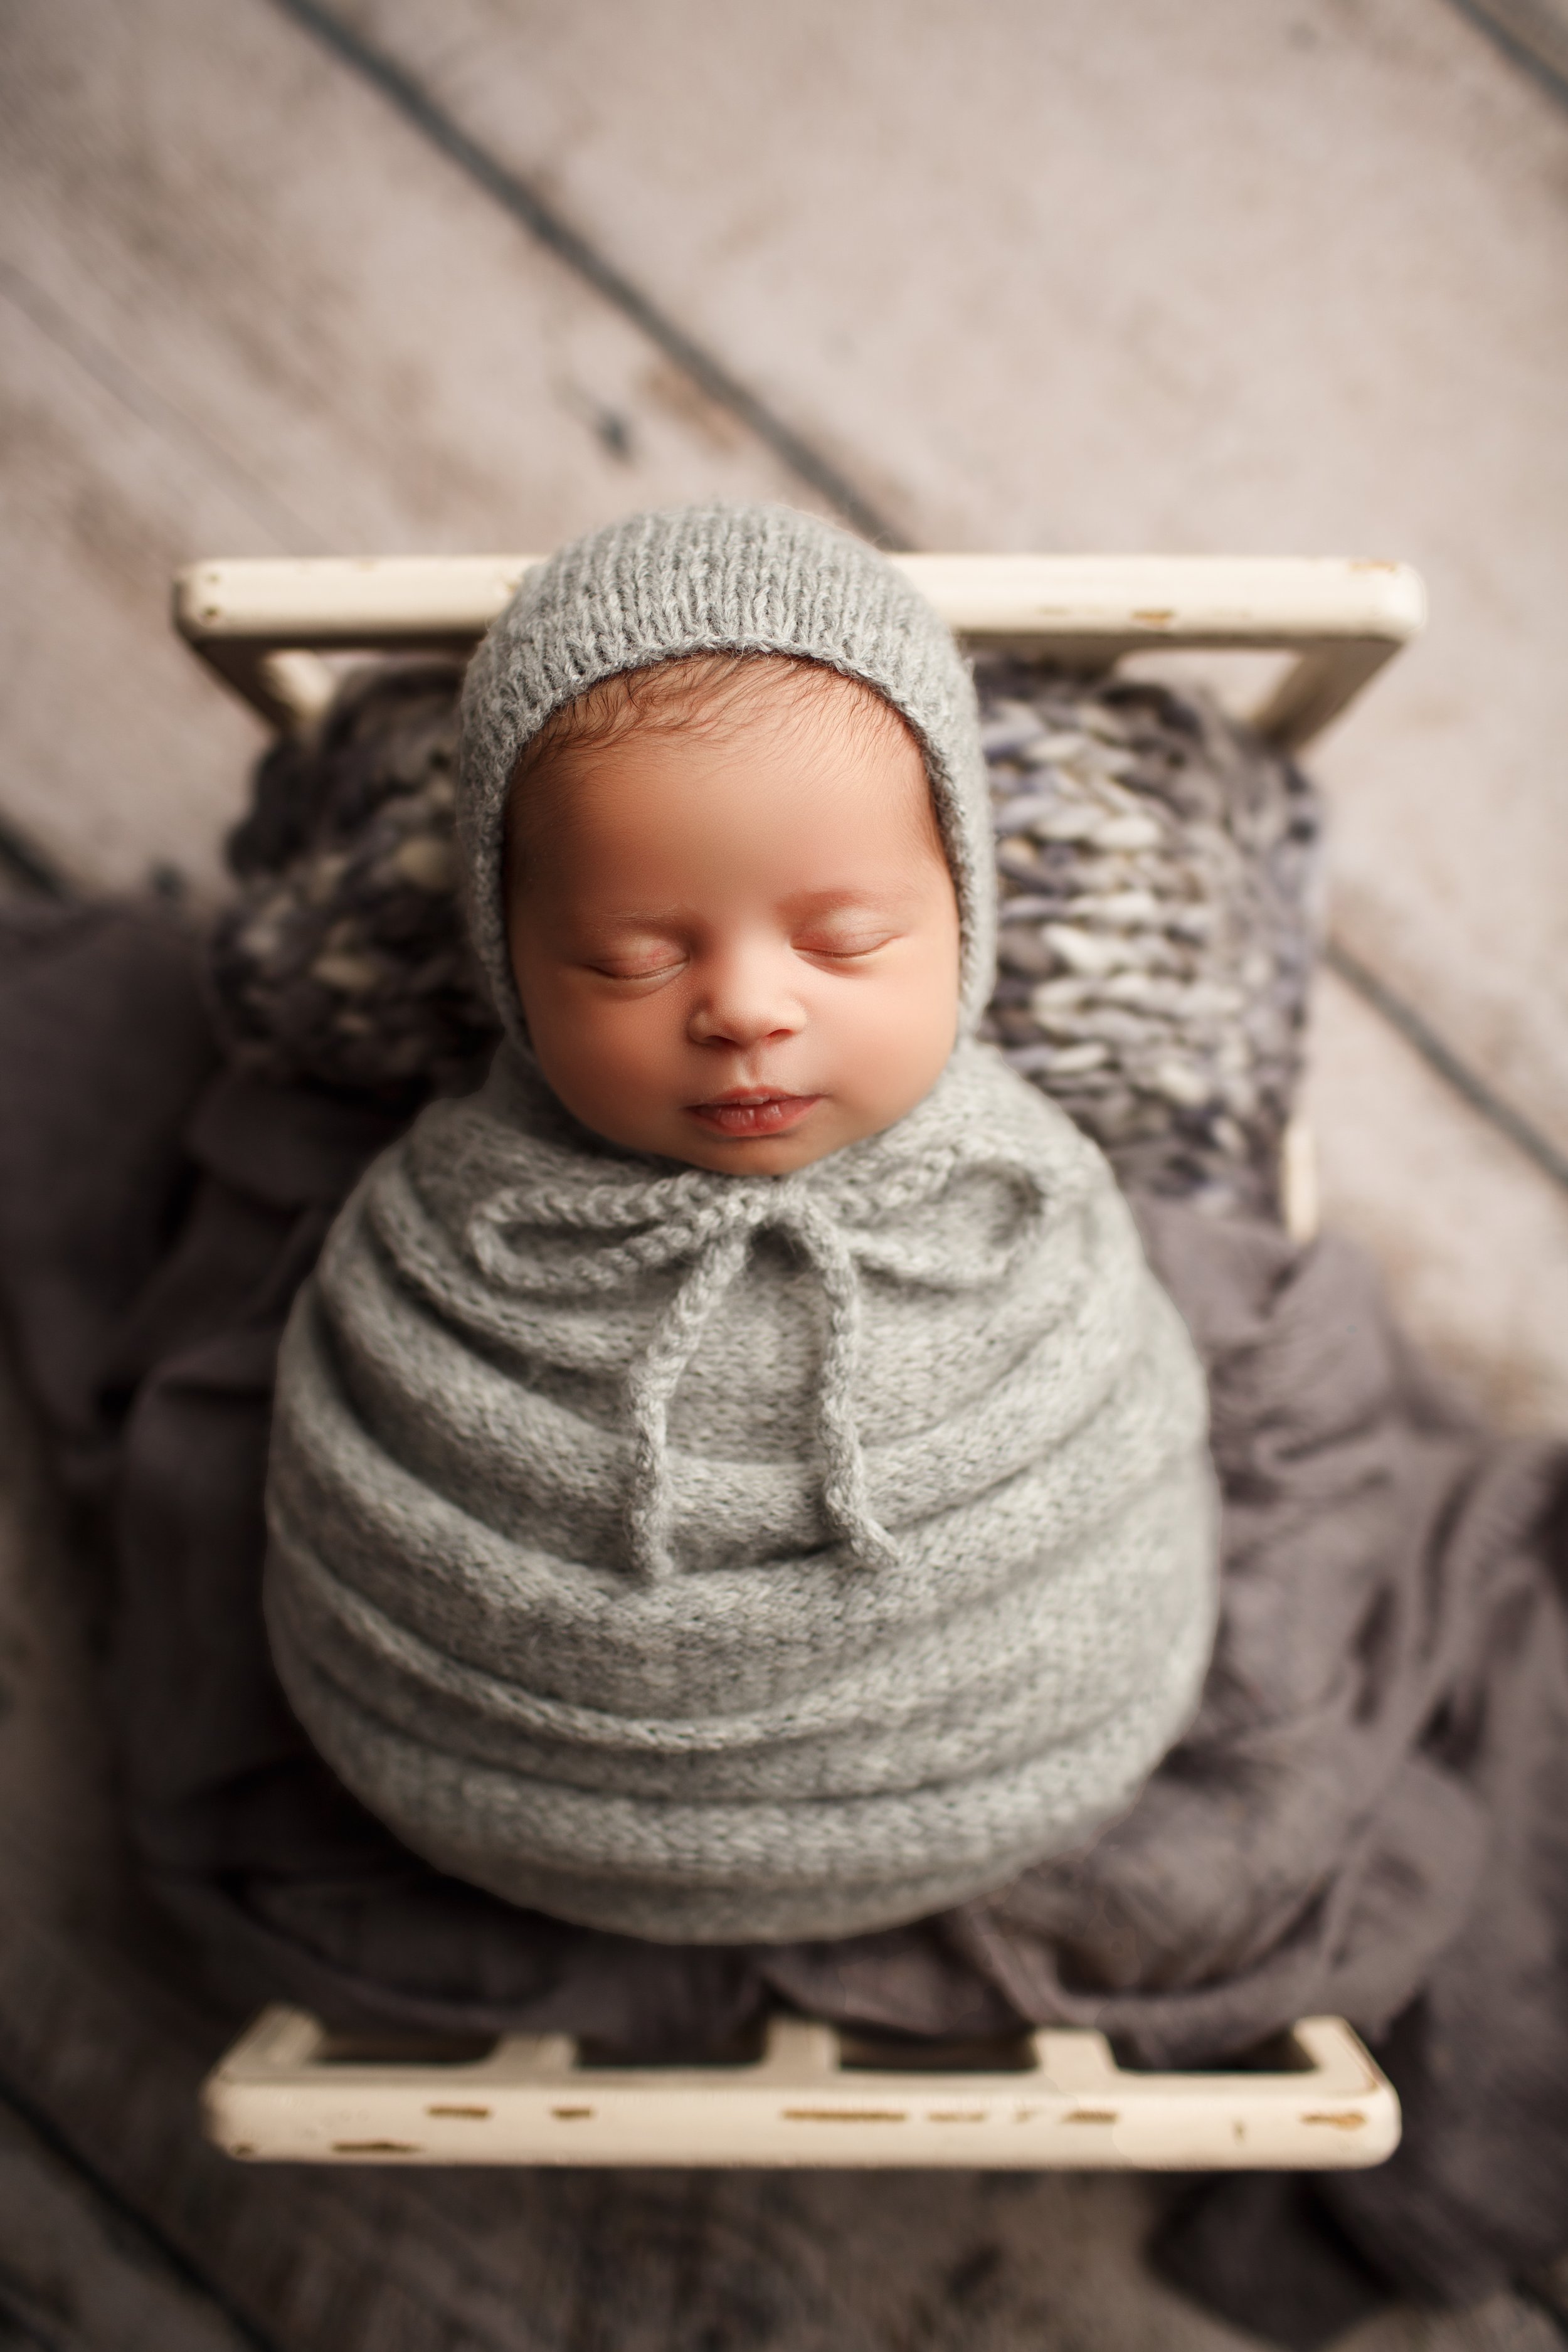  Baby in gray swaddle and hat asleep in miniature wooden crib 